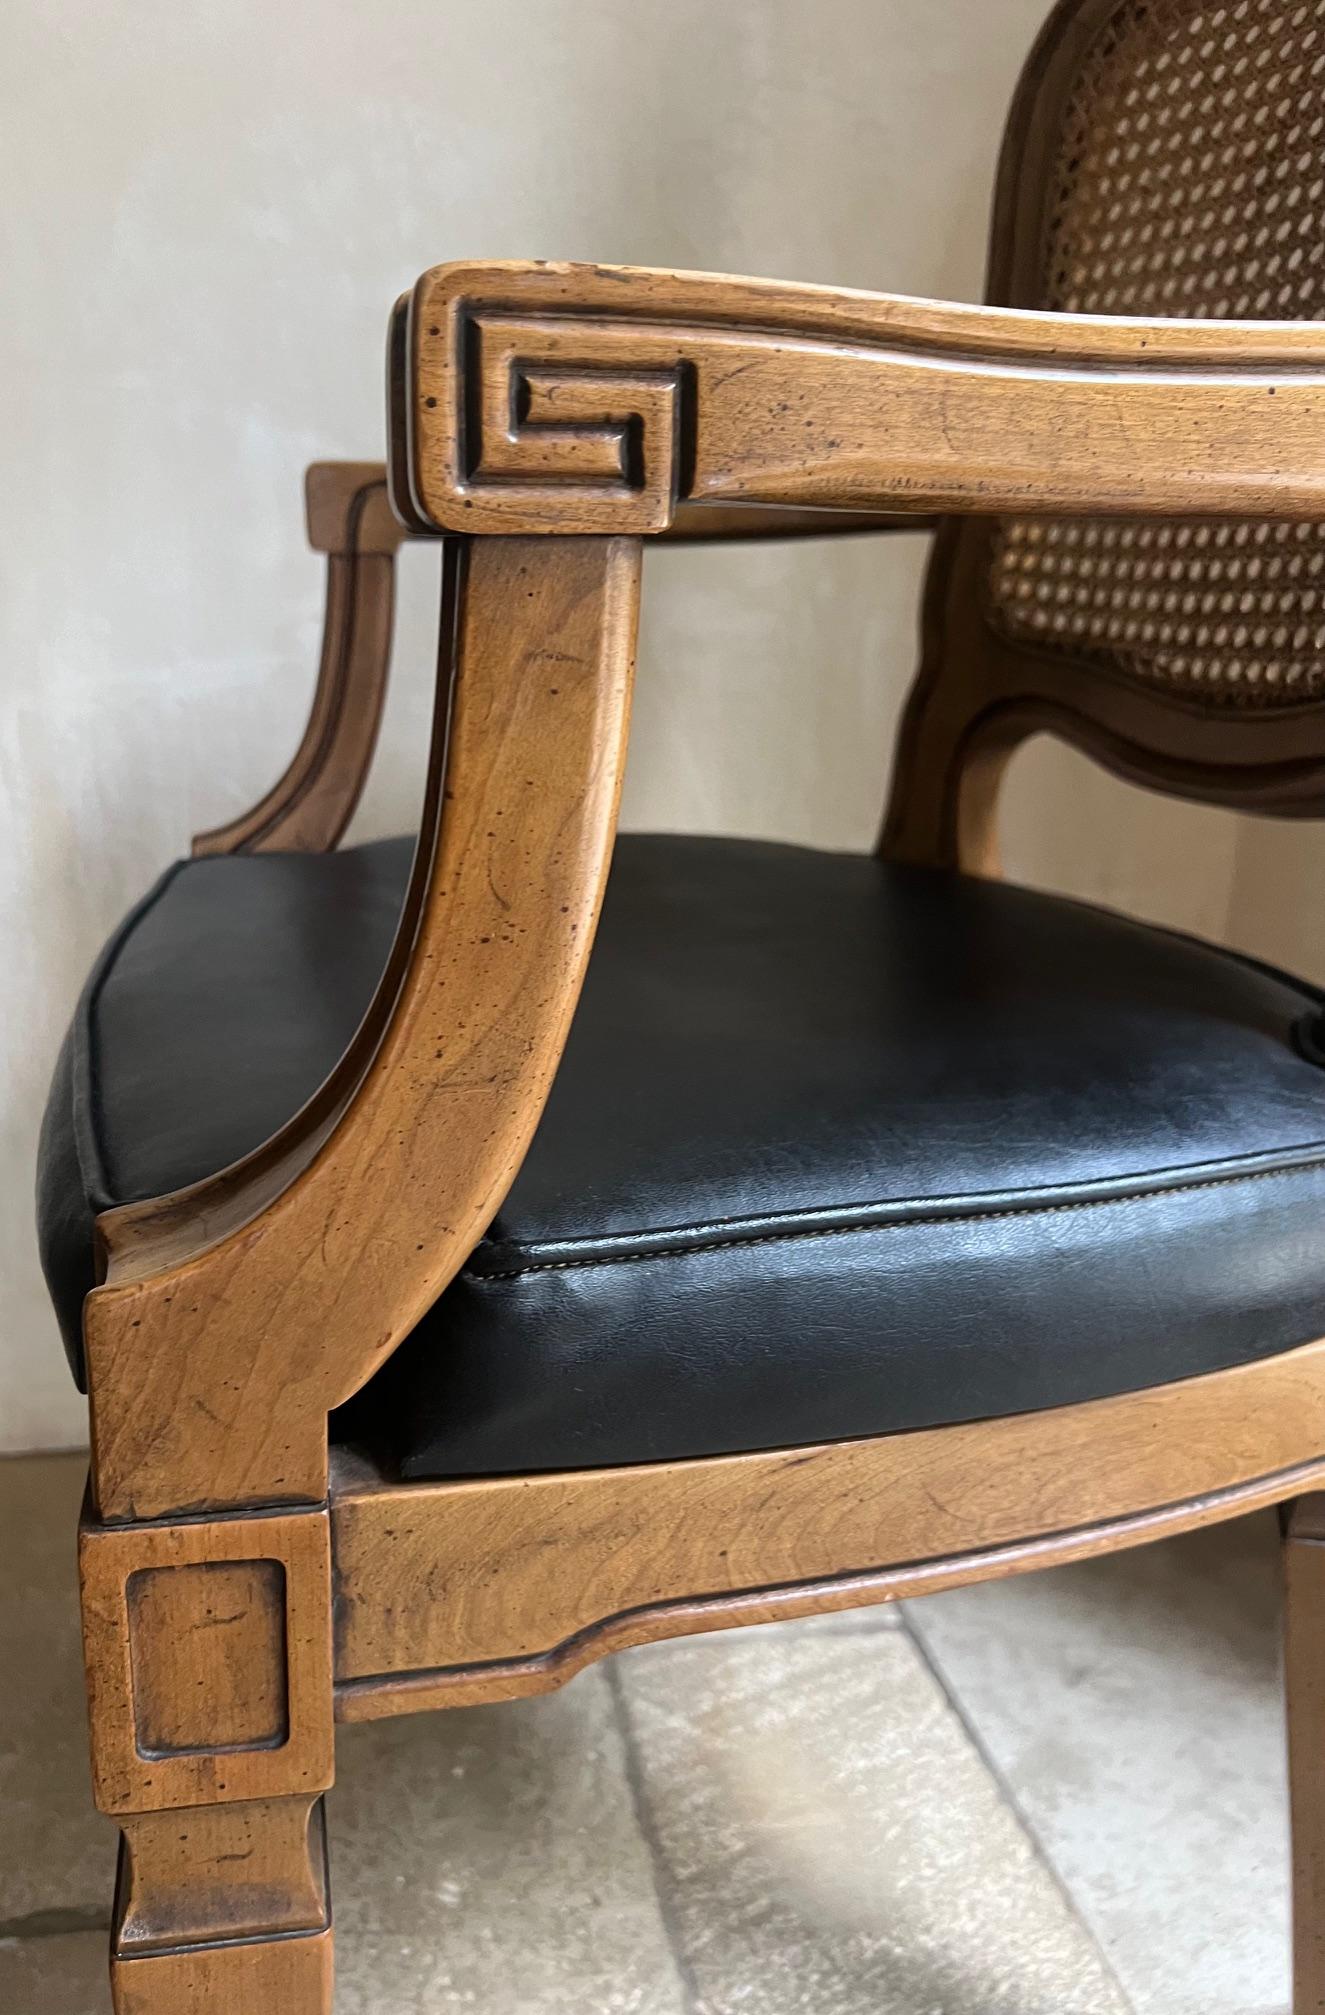 Vintage French Country cane back armchair  chair with faux leather seat made by Henredon, made in the 1960's.

All my furniture can be picked up in the San Francisco Bay area for free.